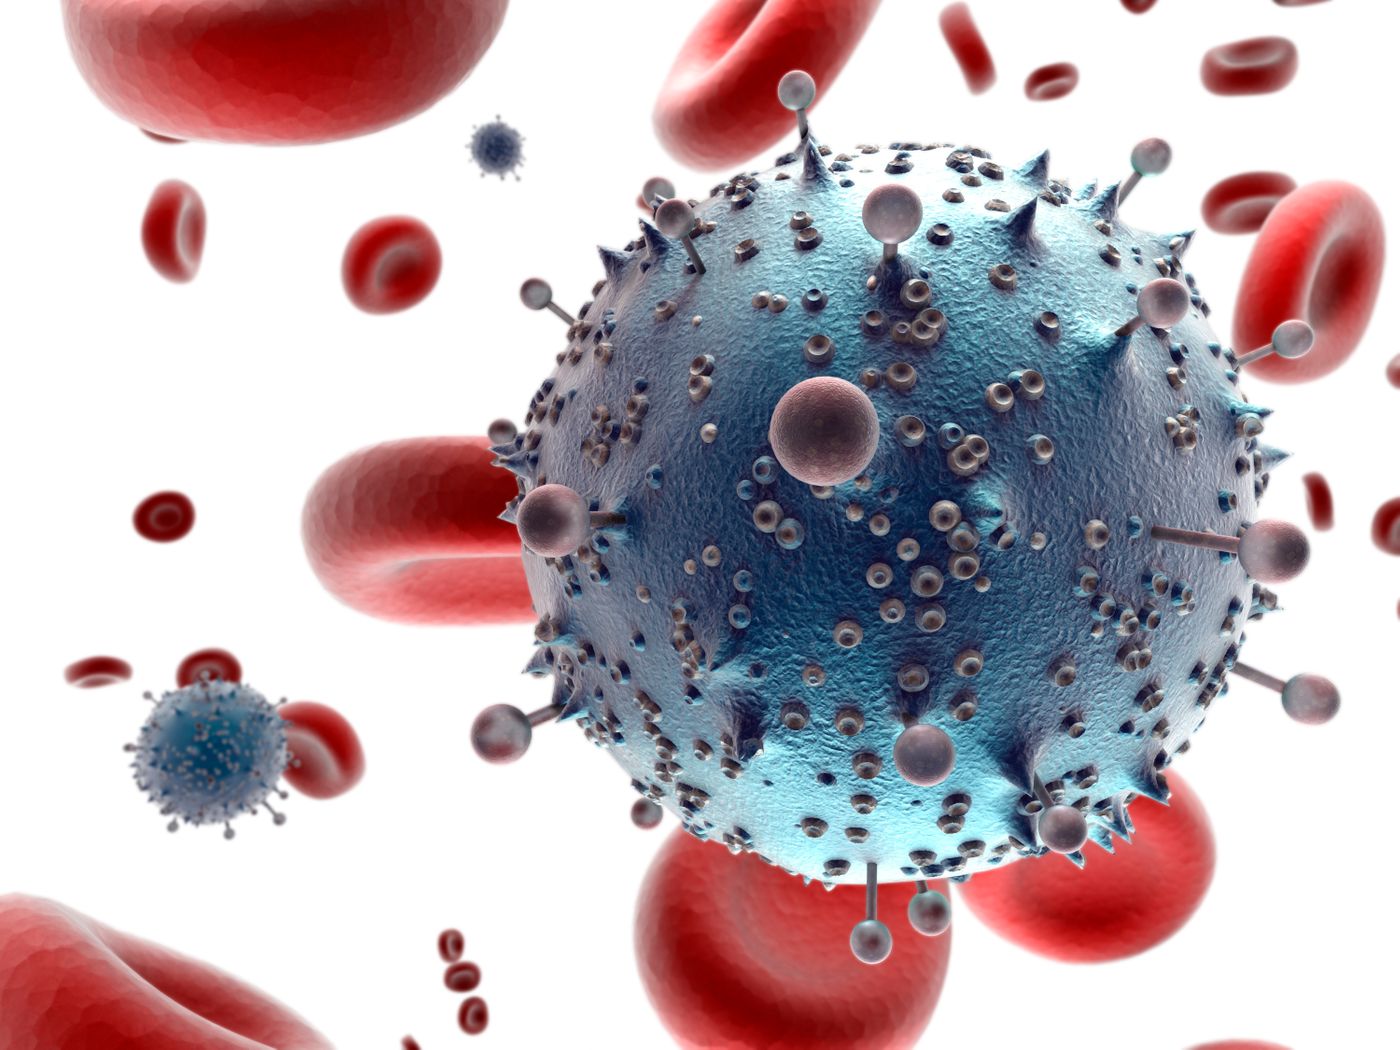 An HIV viral particle